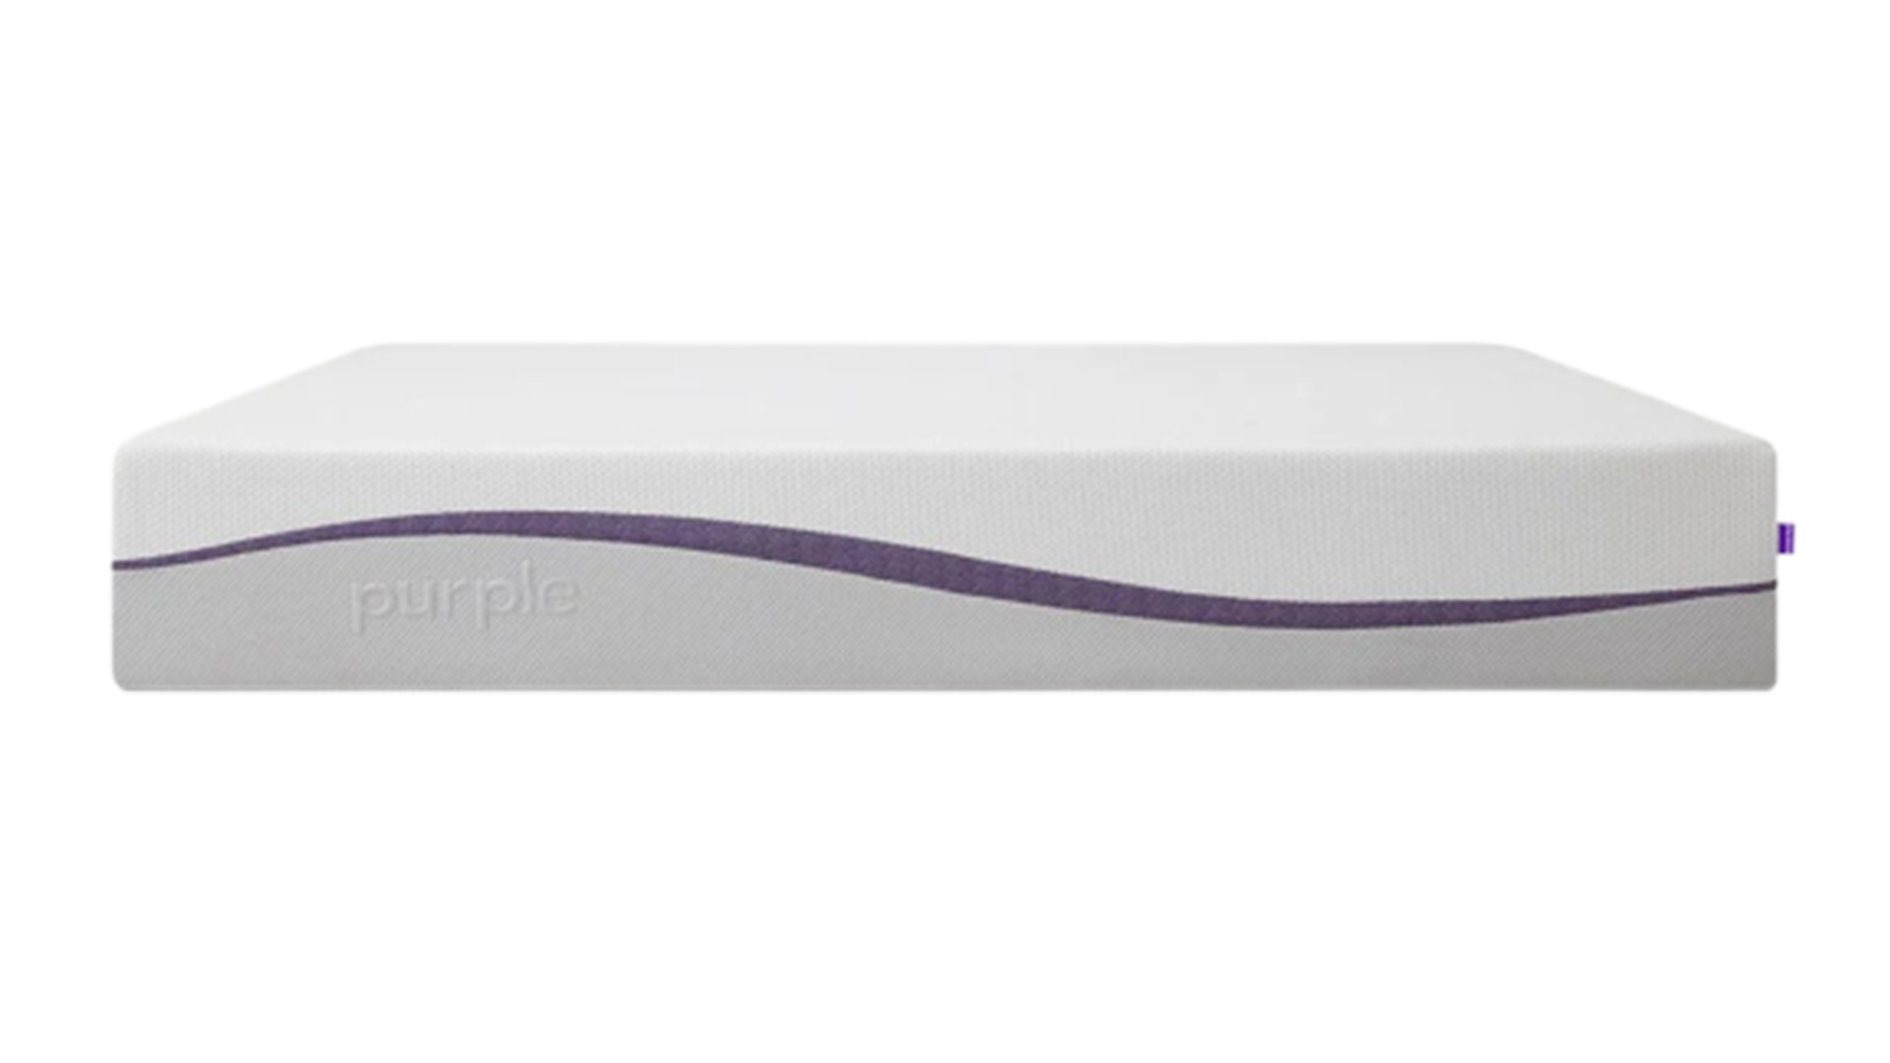 Best Purple Mattress Sales, Promo Codes & Offers: The Purple Plus Mattress shown sideways so you can see its higher profile compared to the original